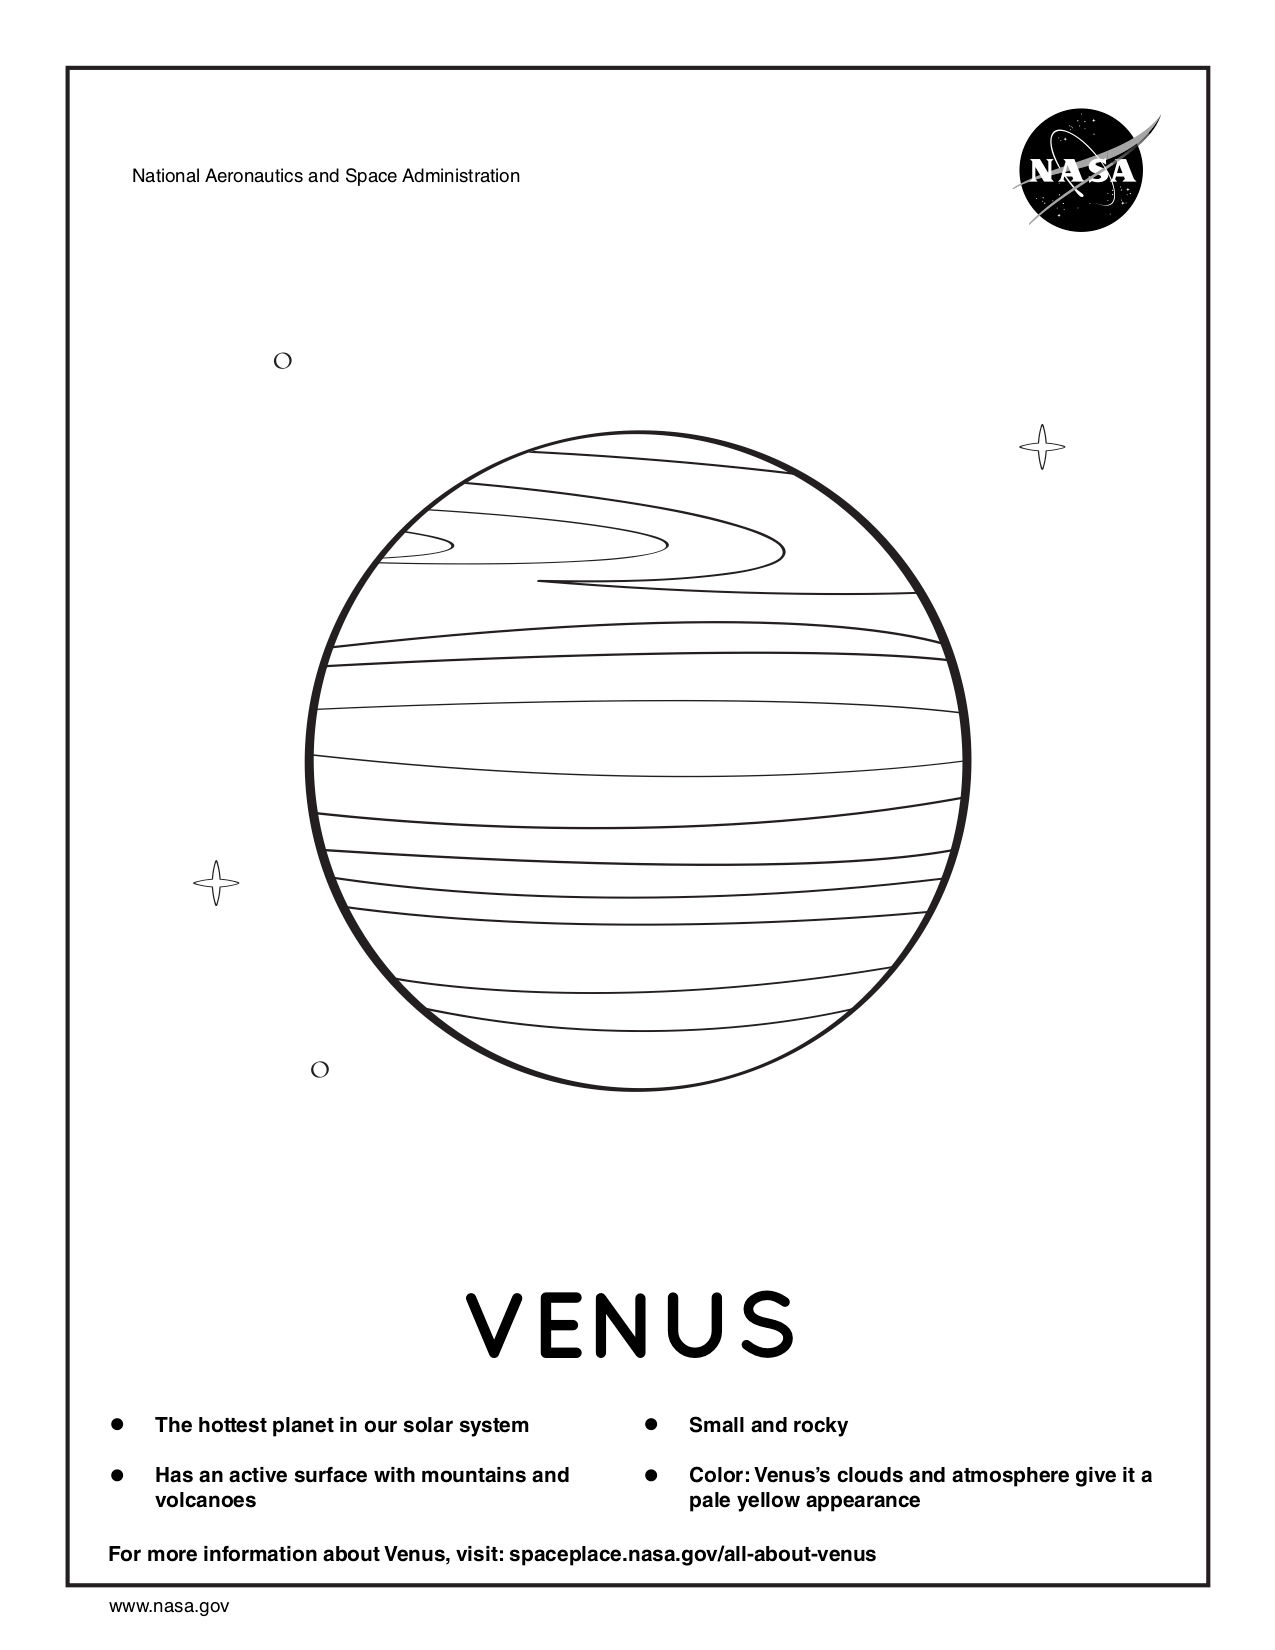 Coloring page for Venus.